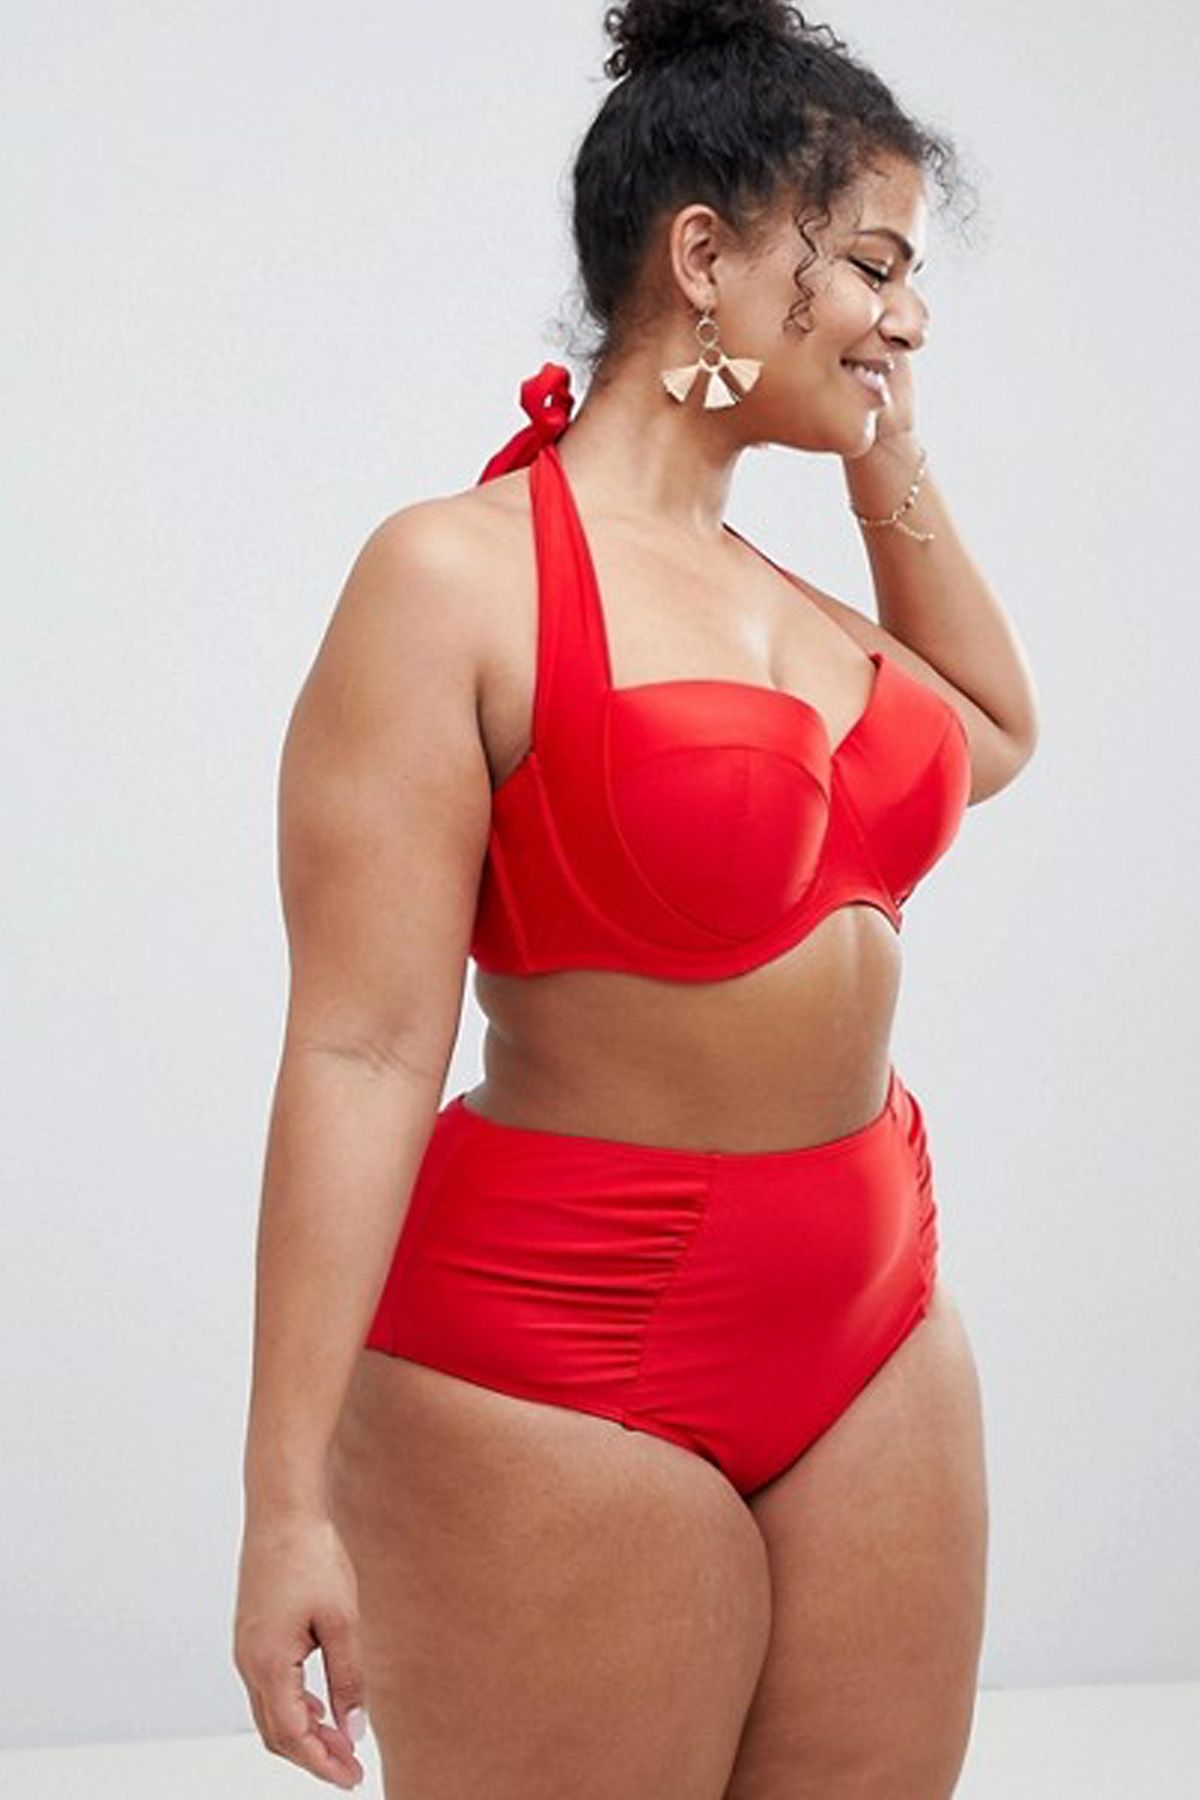 bathing suits for plus size body types